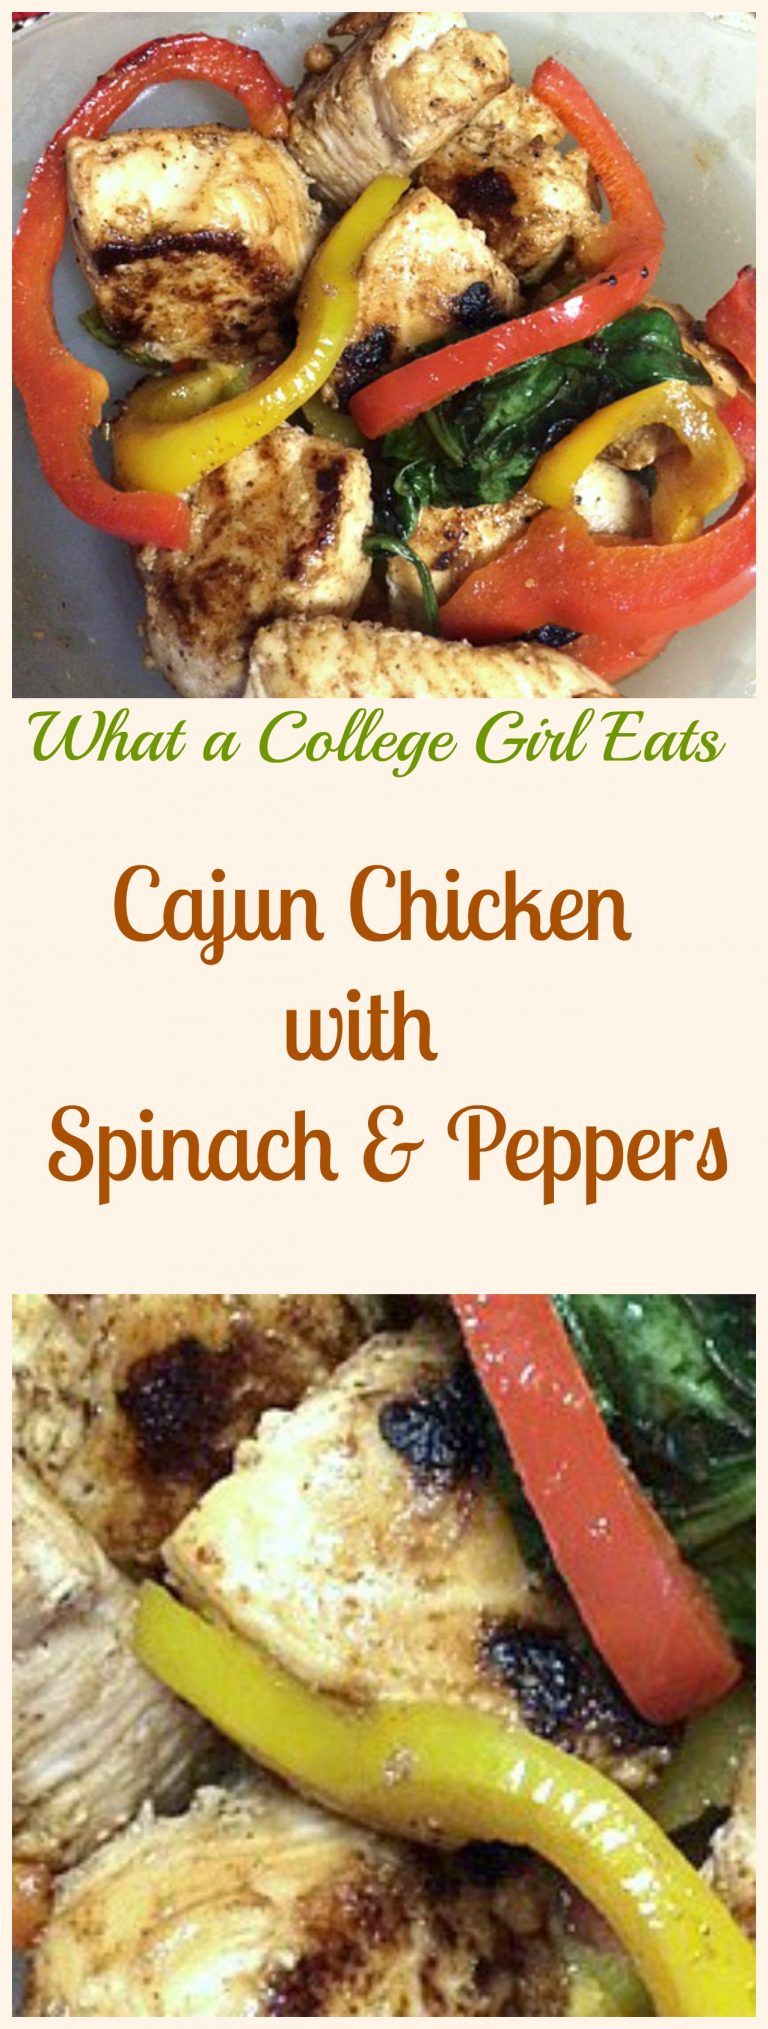 Cajun Chicken with Spinach and Peppers – What a College Girl Eats